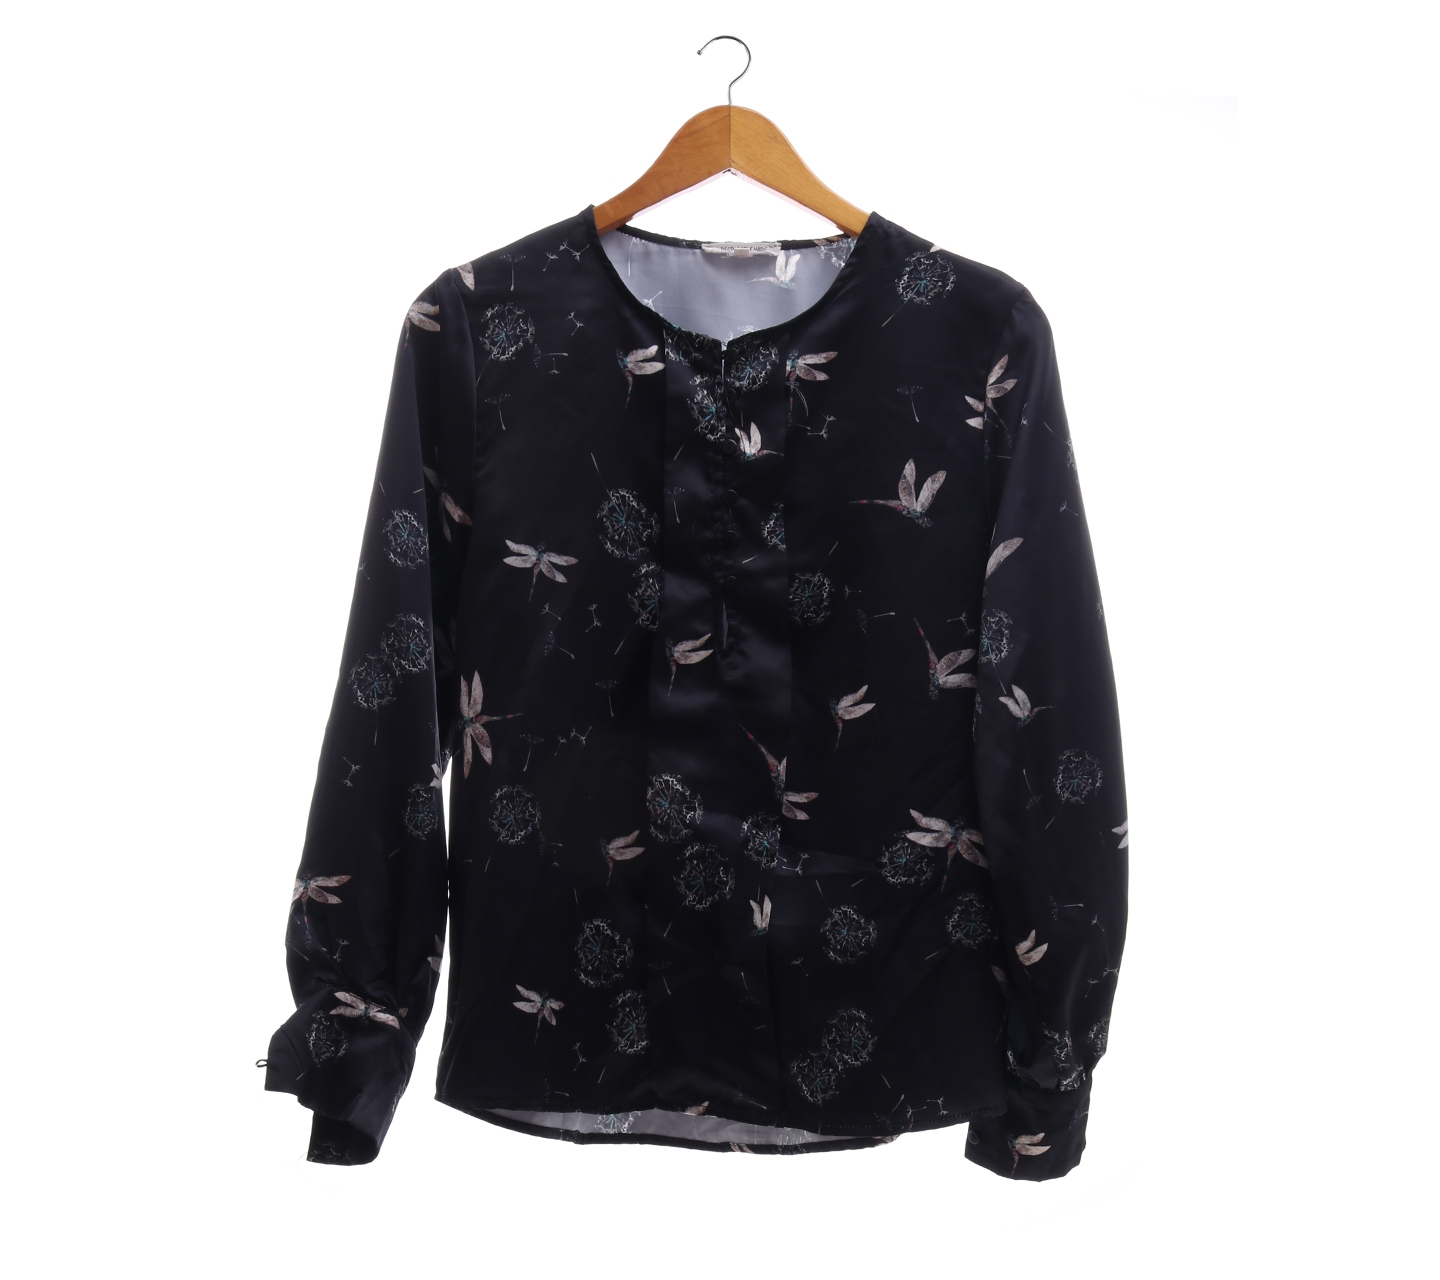 Free People Home Made Black Dragonfly Print Blouse